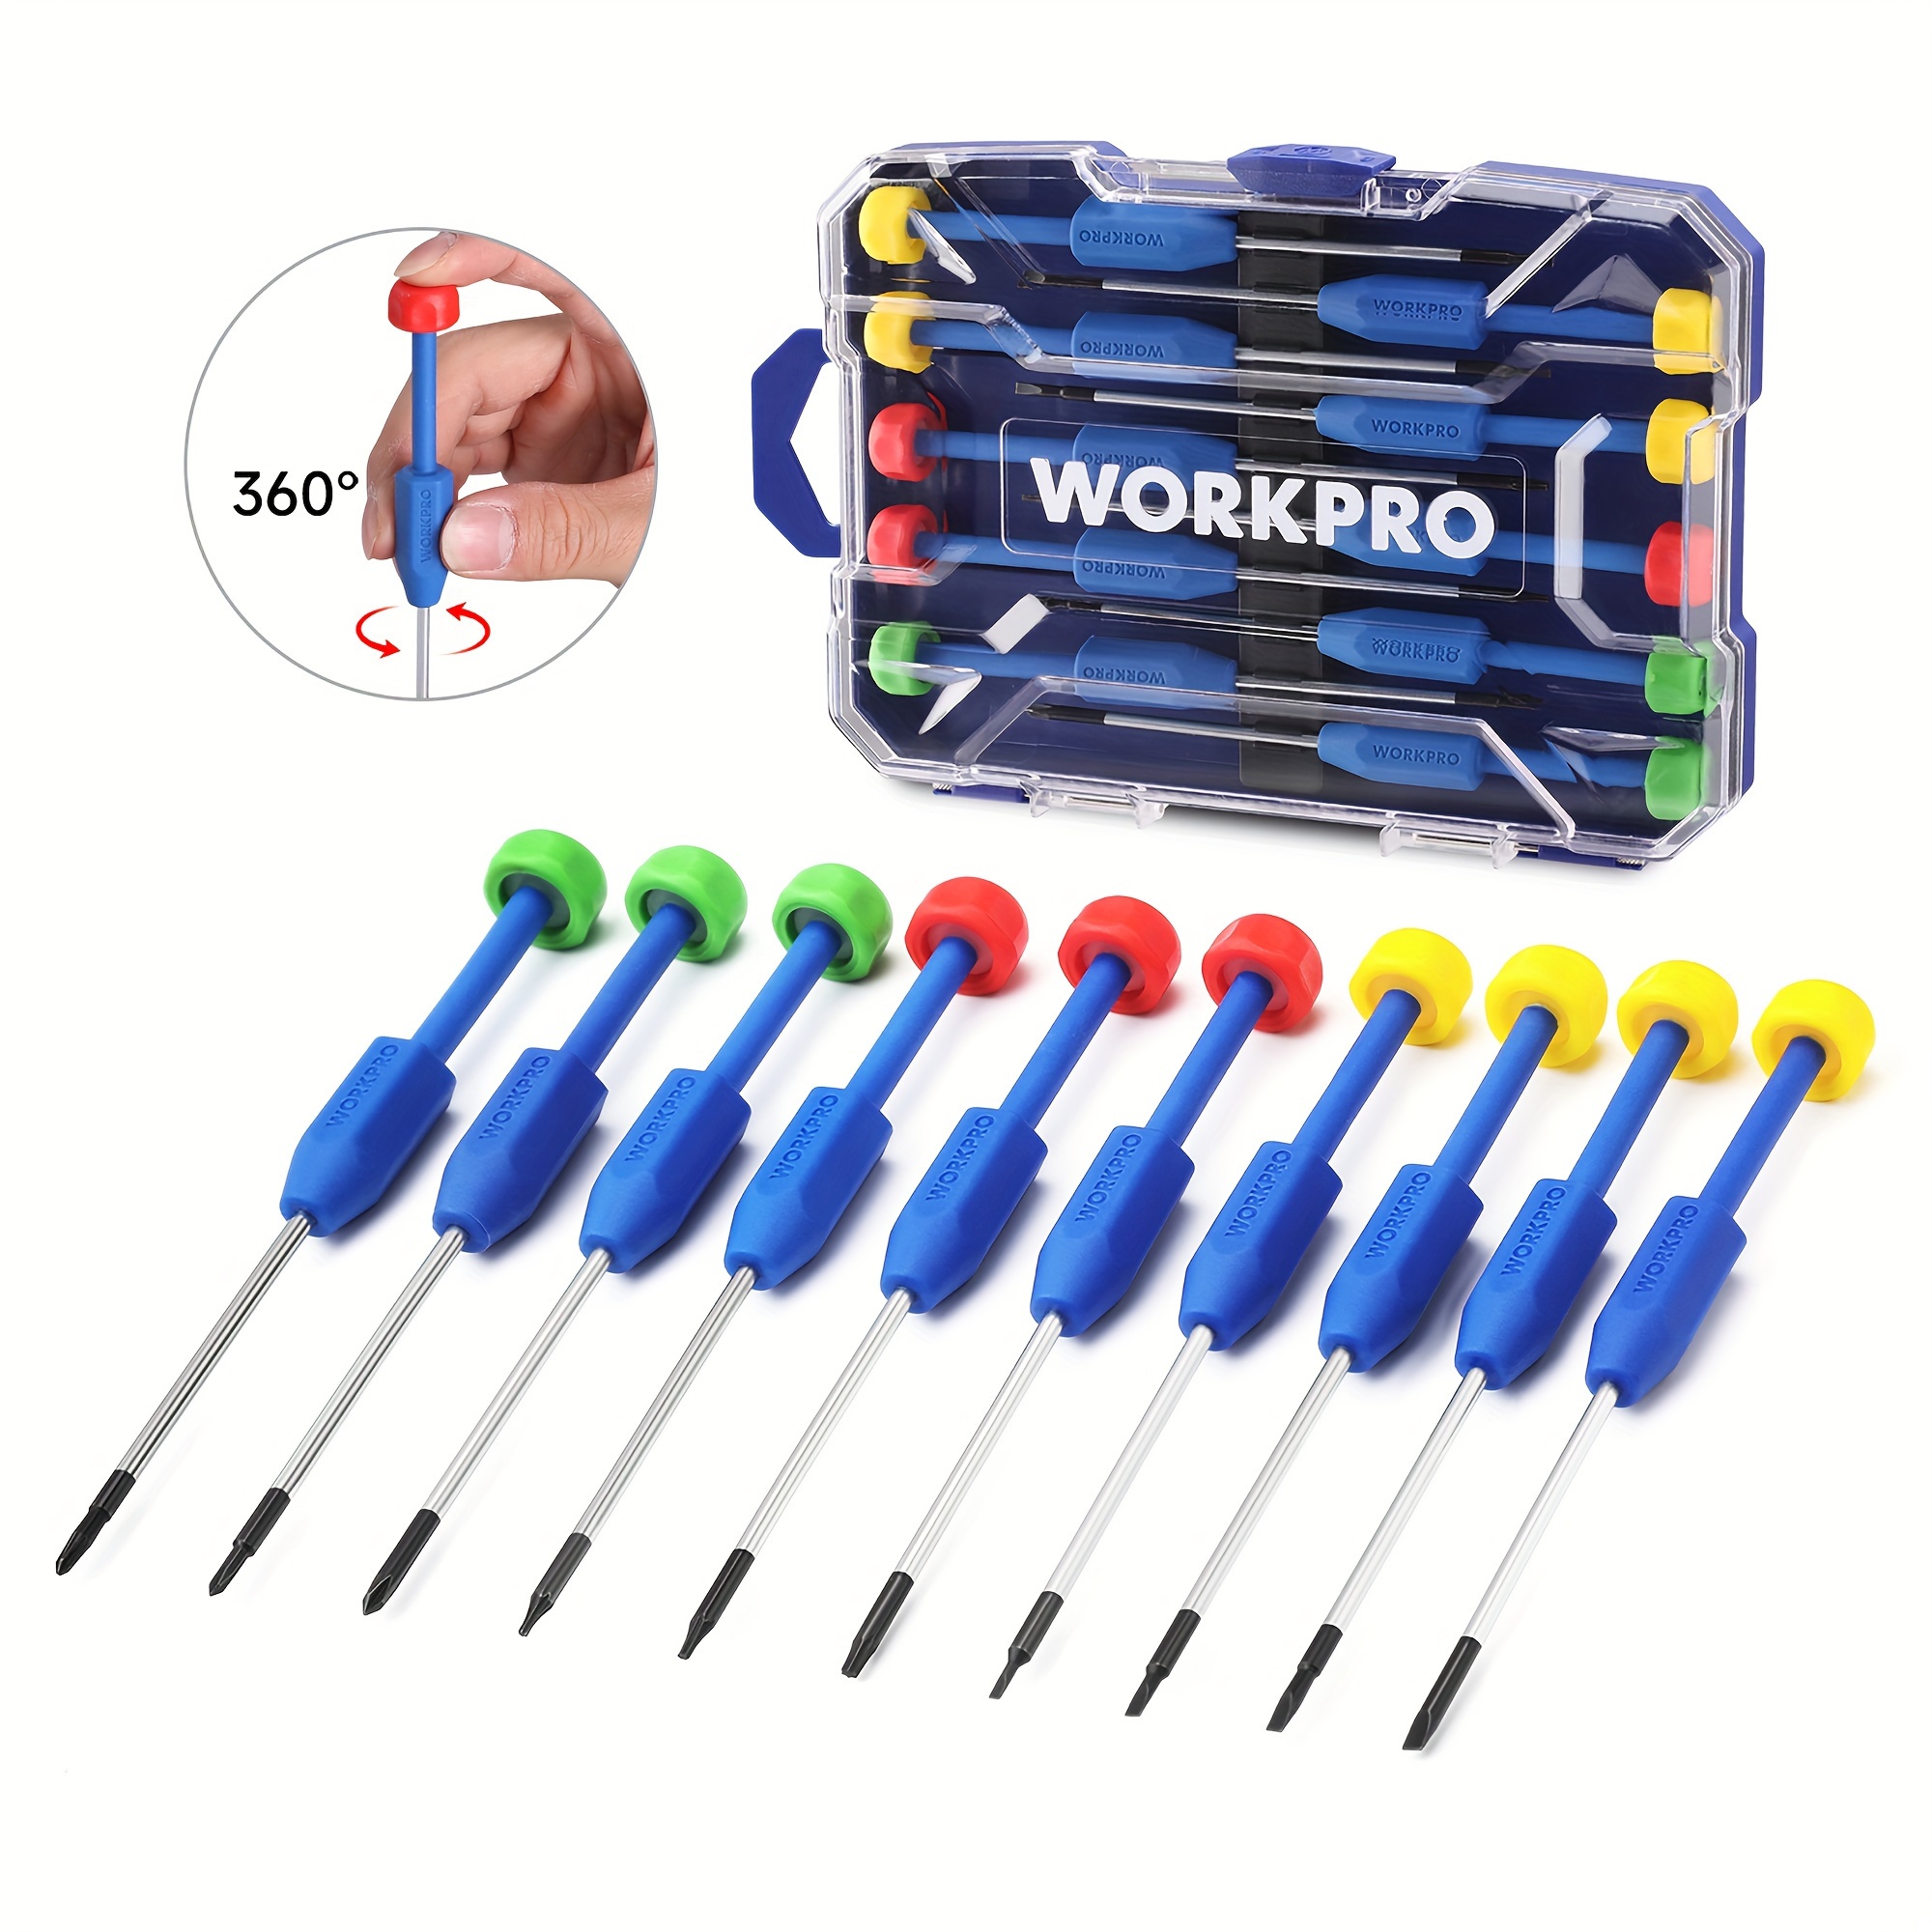 

Workpro 10-piece Precision Screwdriver Set With Case, Phillips, Slotted, Torx Star, Magnetic Screwdriver Repair Tool Kit In Different Sizes Colors, Non-slip Grip For Eyeglass, Watch, Computer, Phone